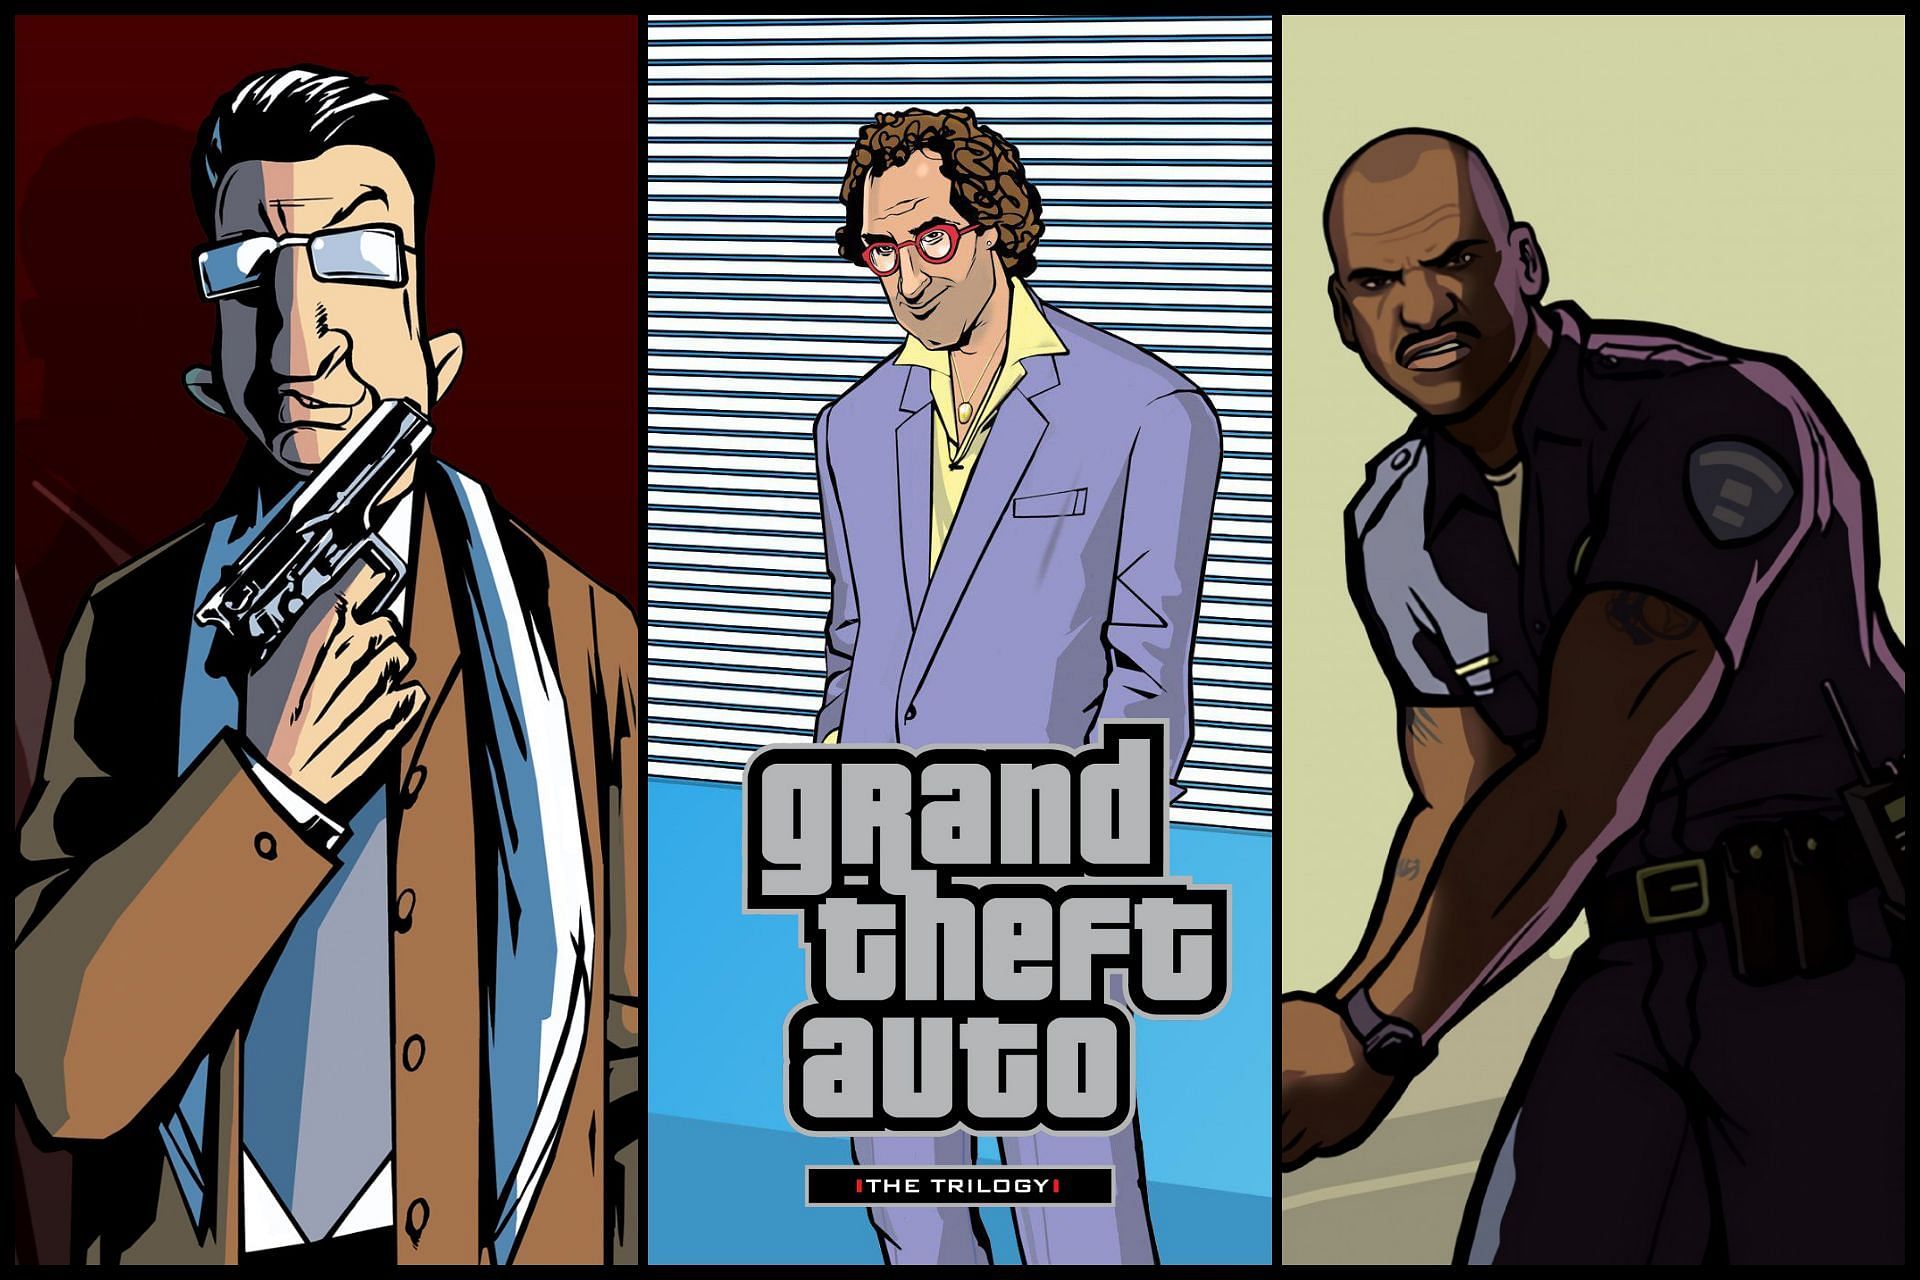 Will the remastered trilogy manage to appease GTA fans? (Image via Sportskeeda)